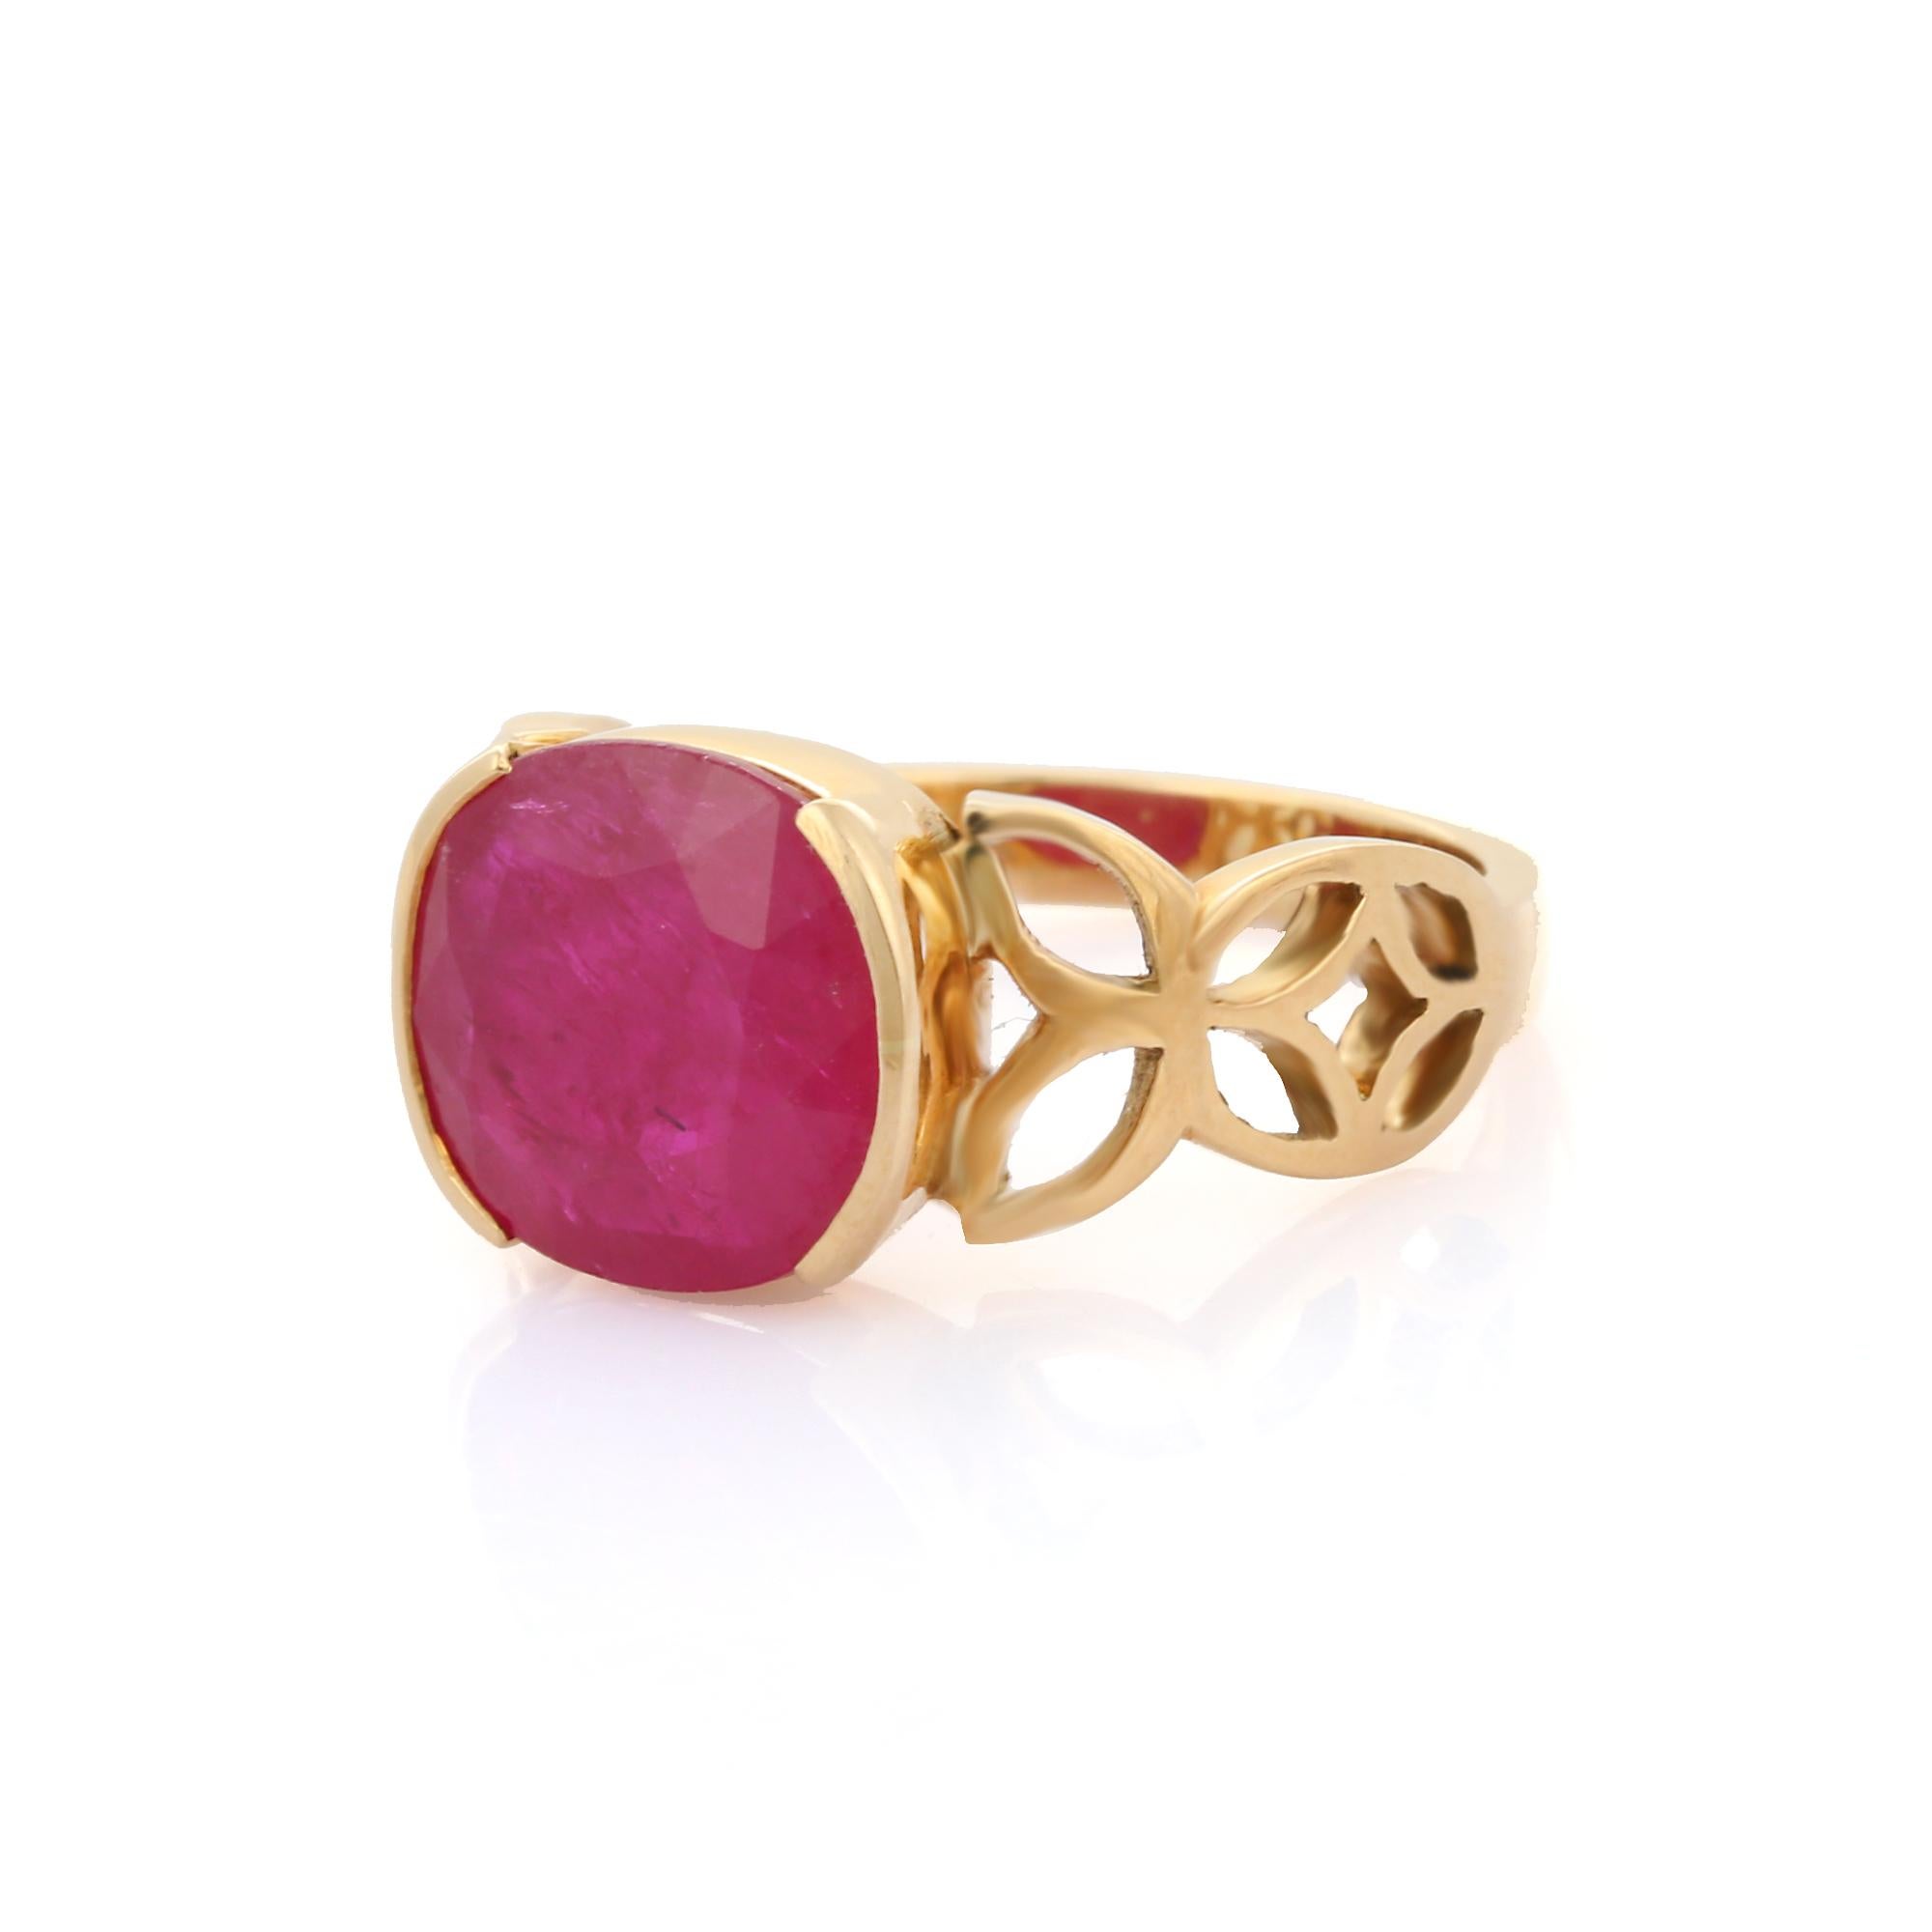 For Sale:  4.6 Carat Ruby Cocktail Ring with Engraving in 18K Solid Yellow Gold 3